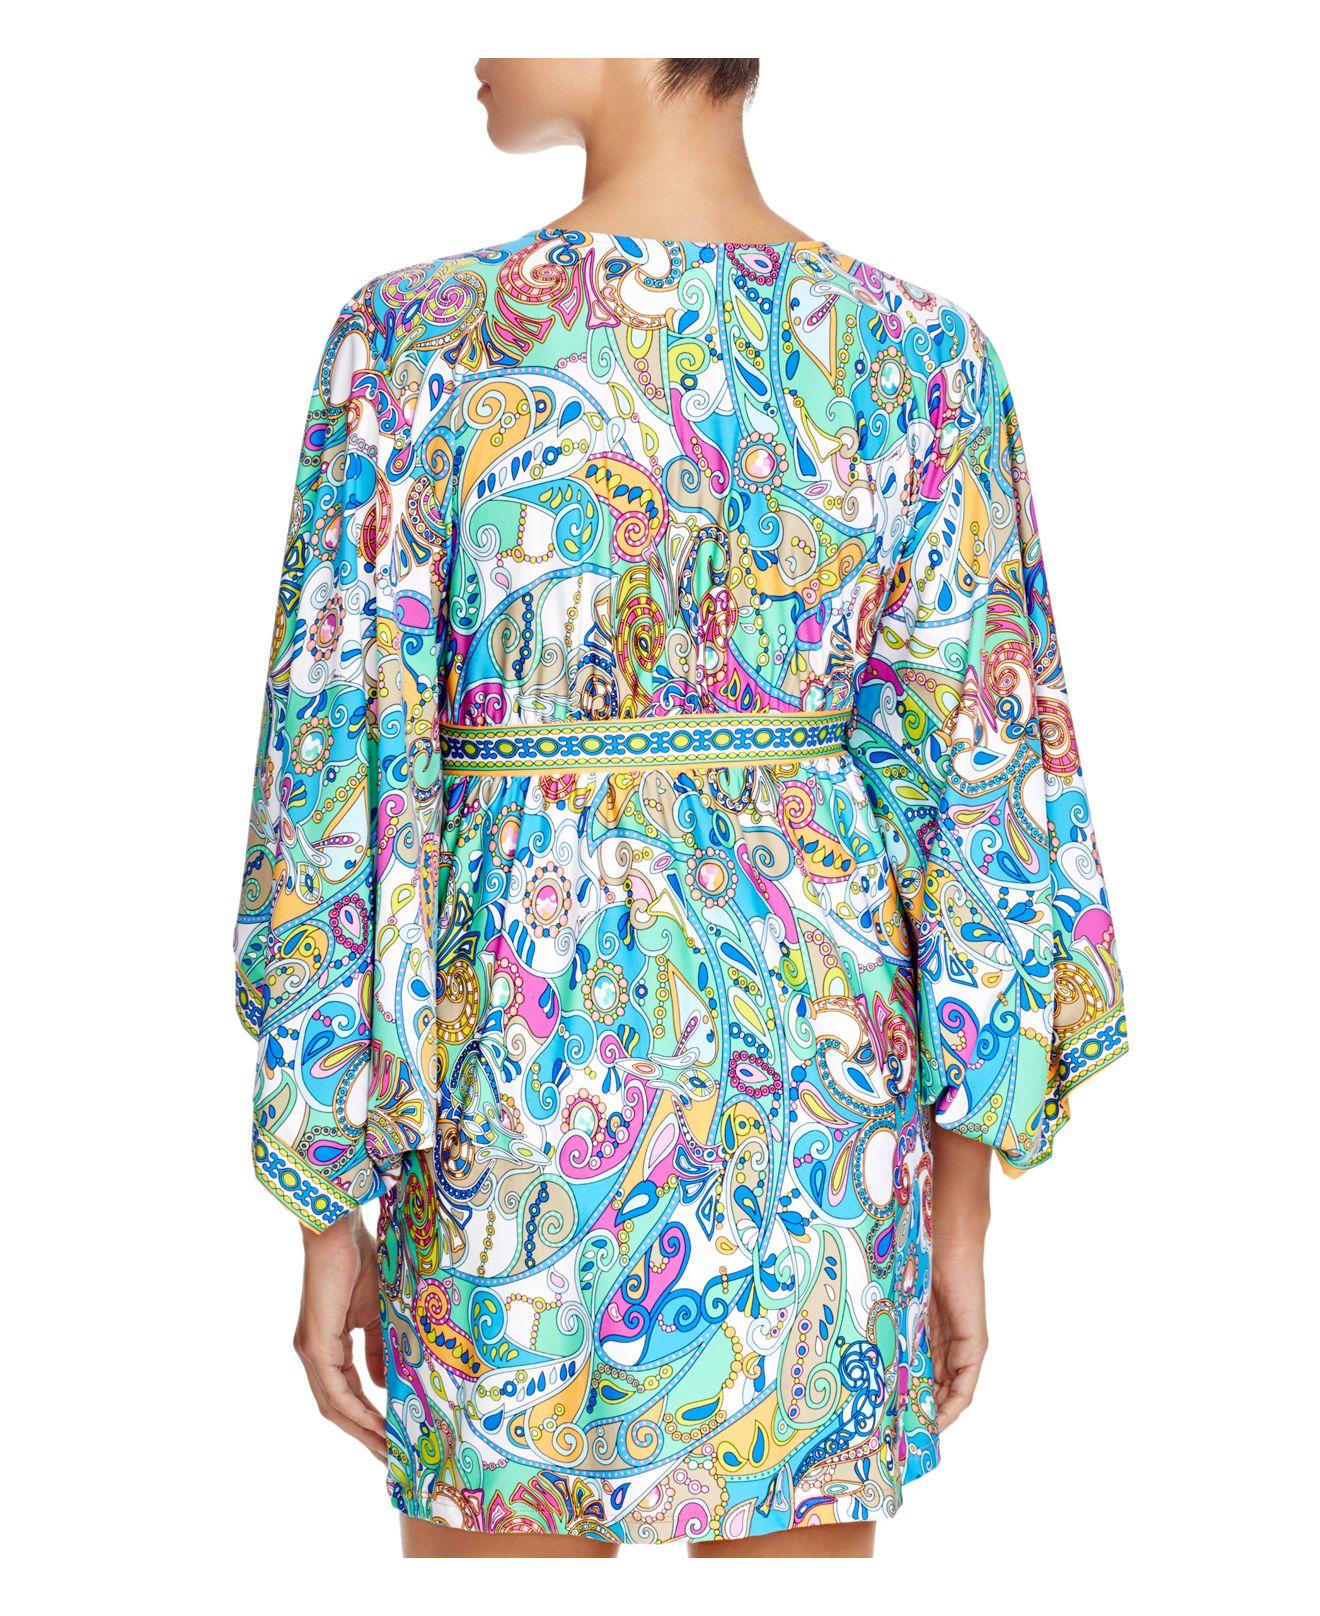 Trina turk Mykonos Tunic Swim Cover-up - 100% Bloomingdale's Exclusive ...